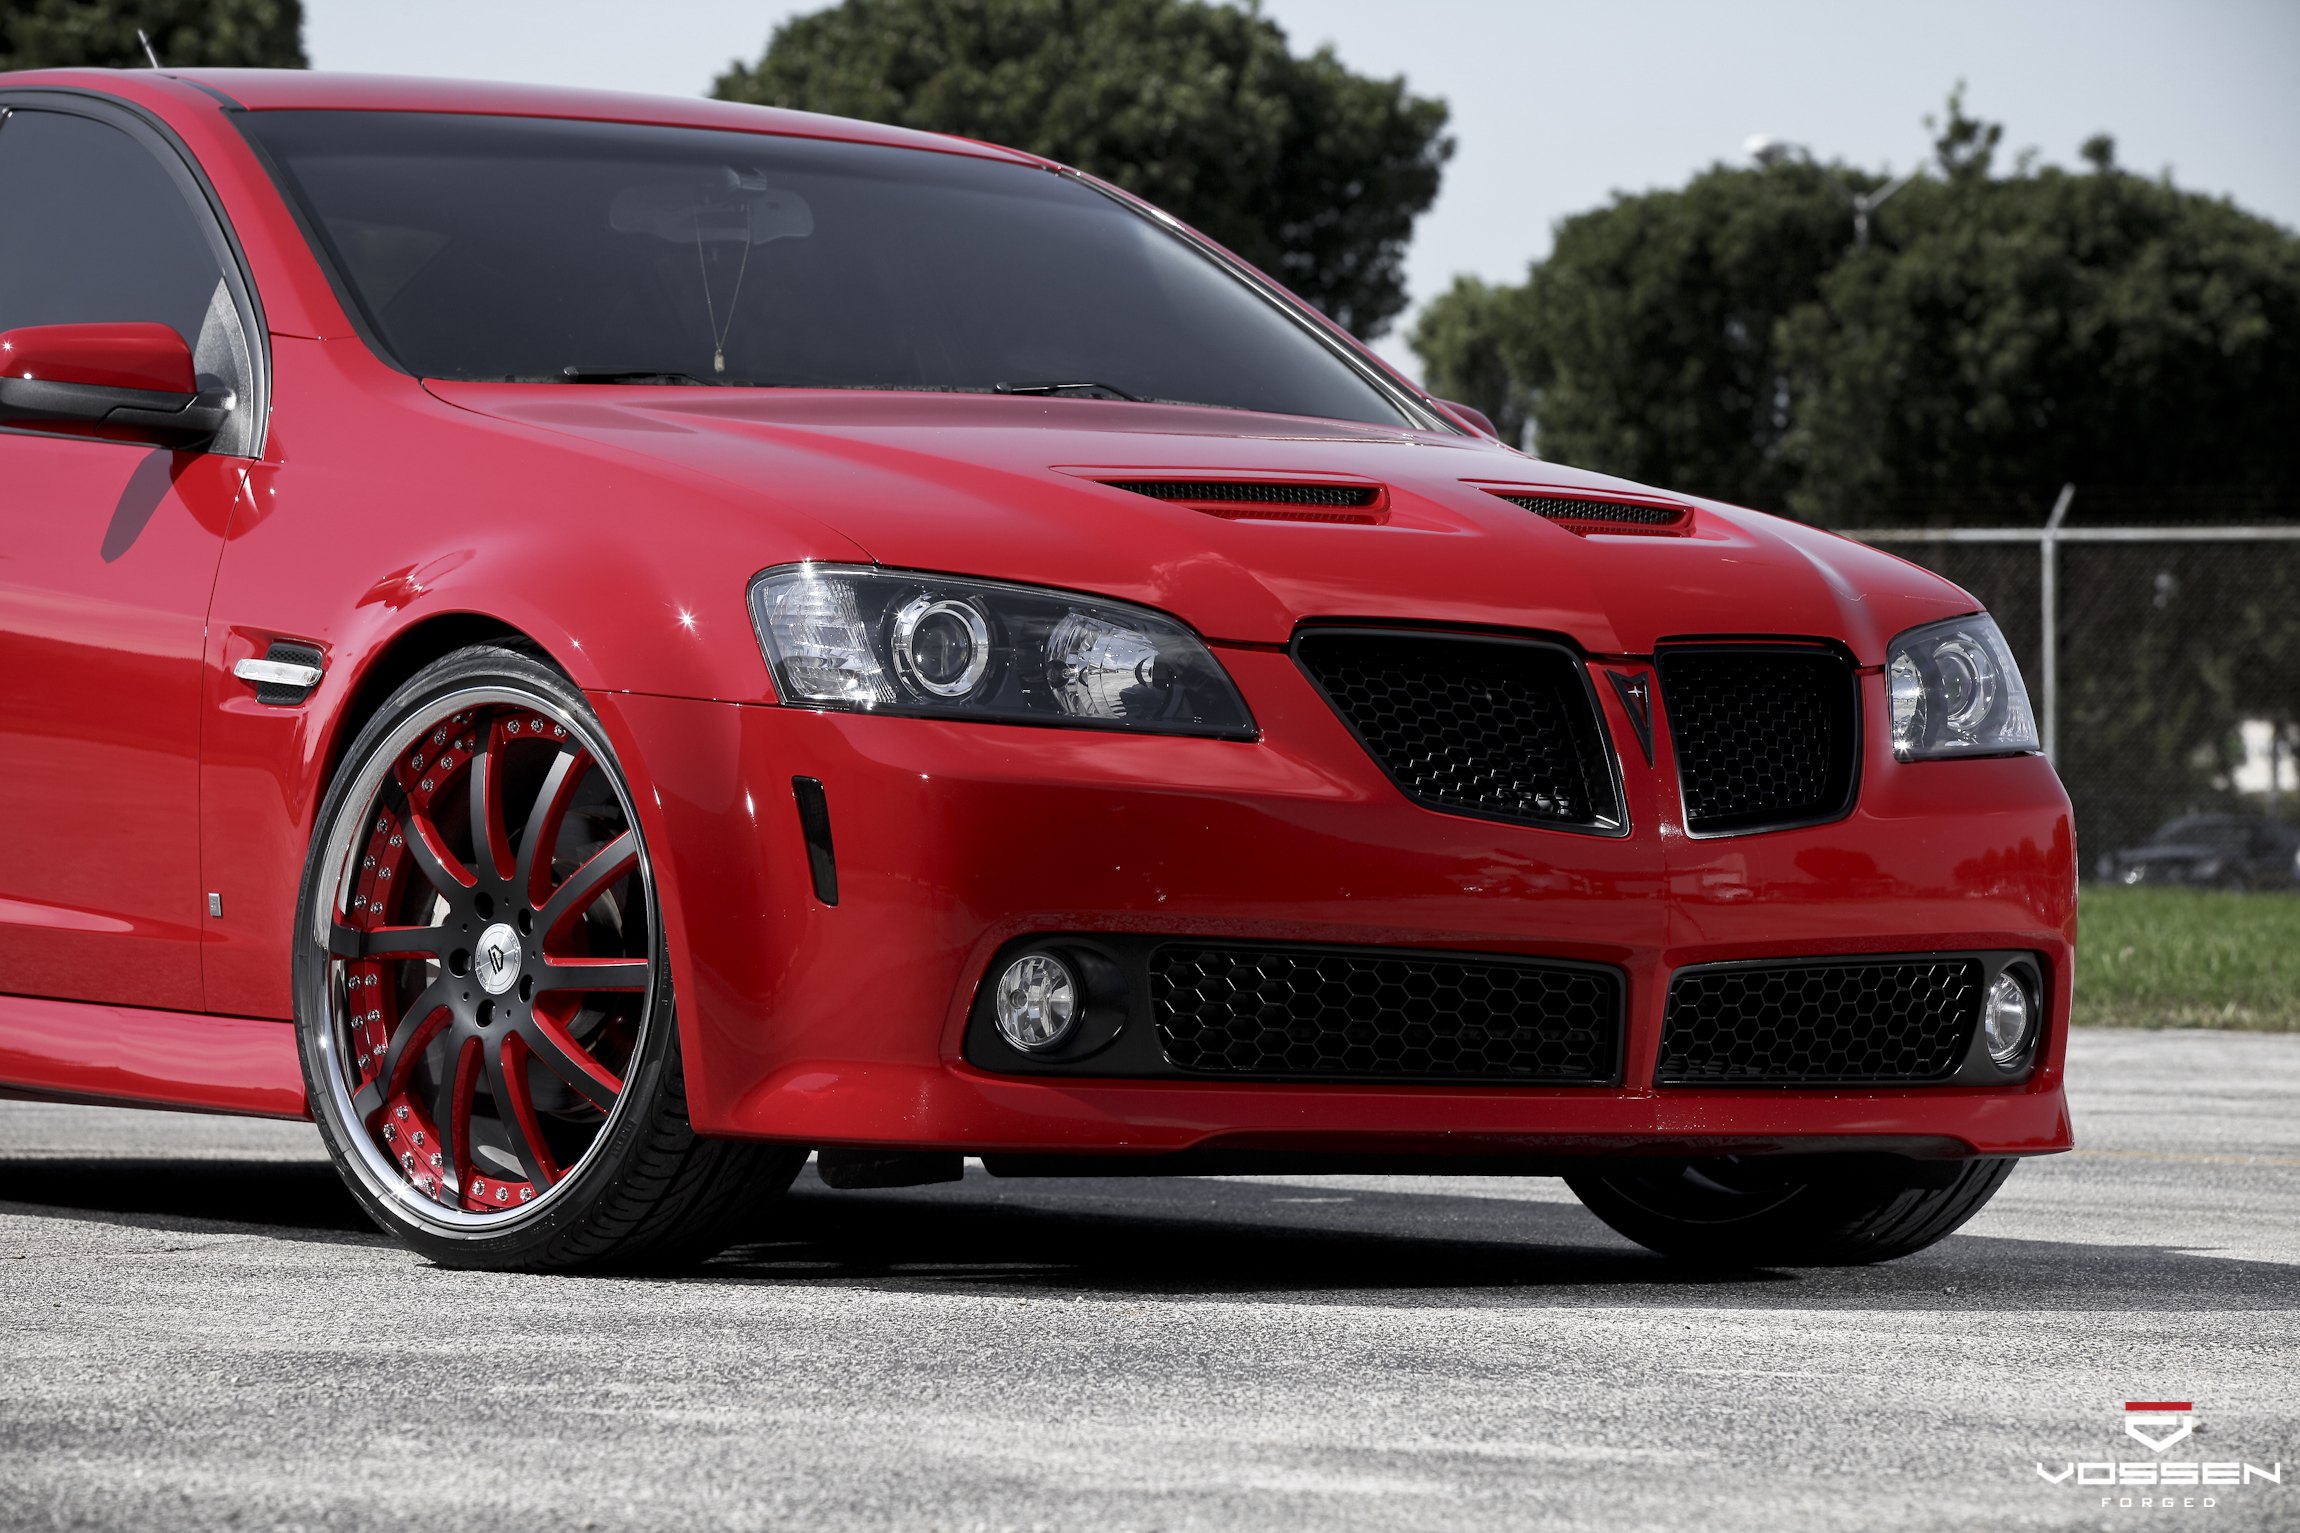 Custom Grille on Red Pontiac G8 - Photo by Vossen